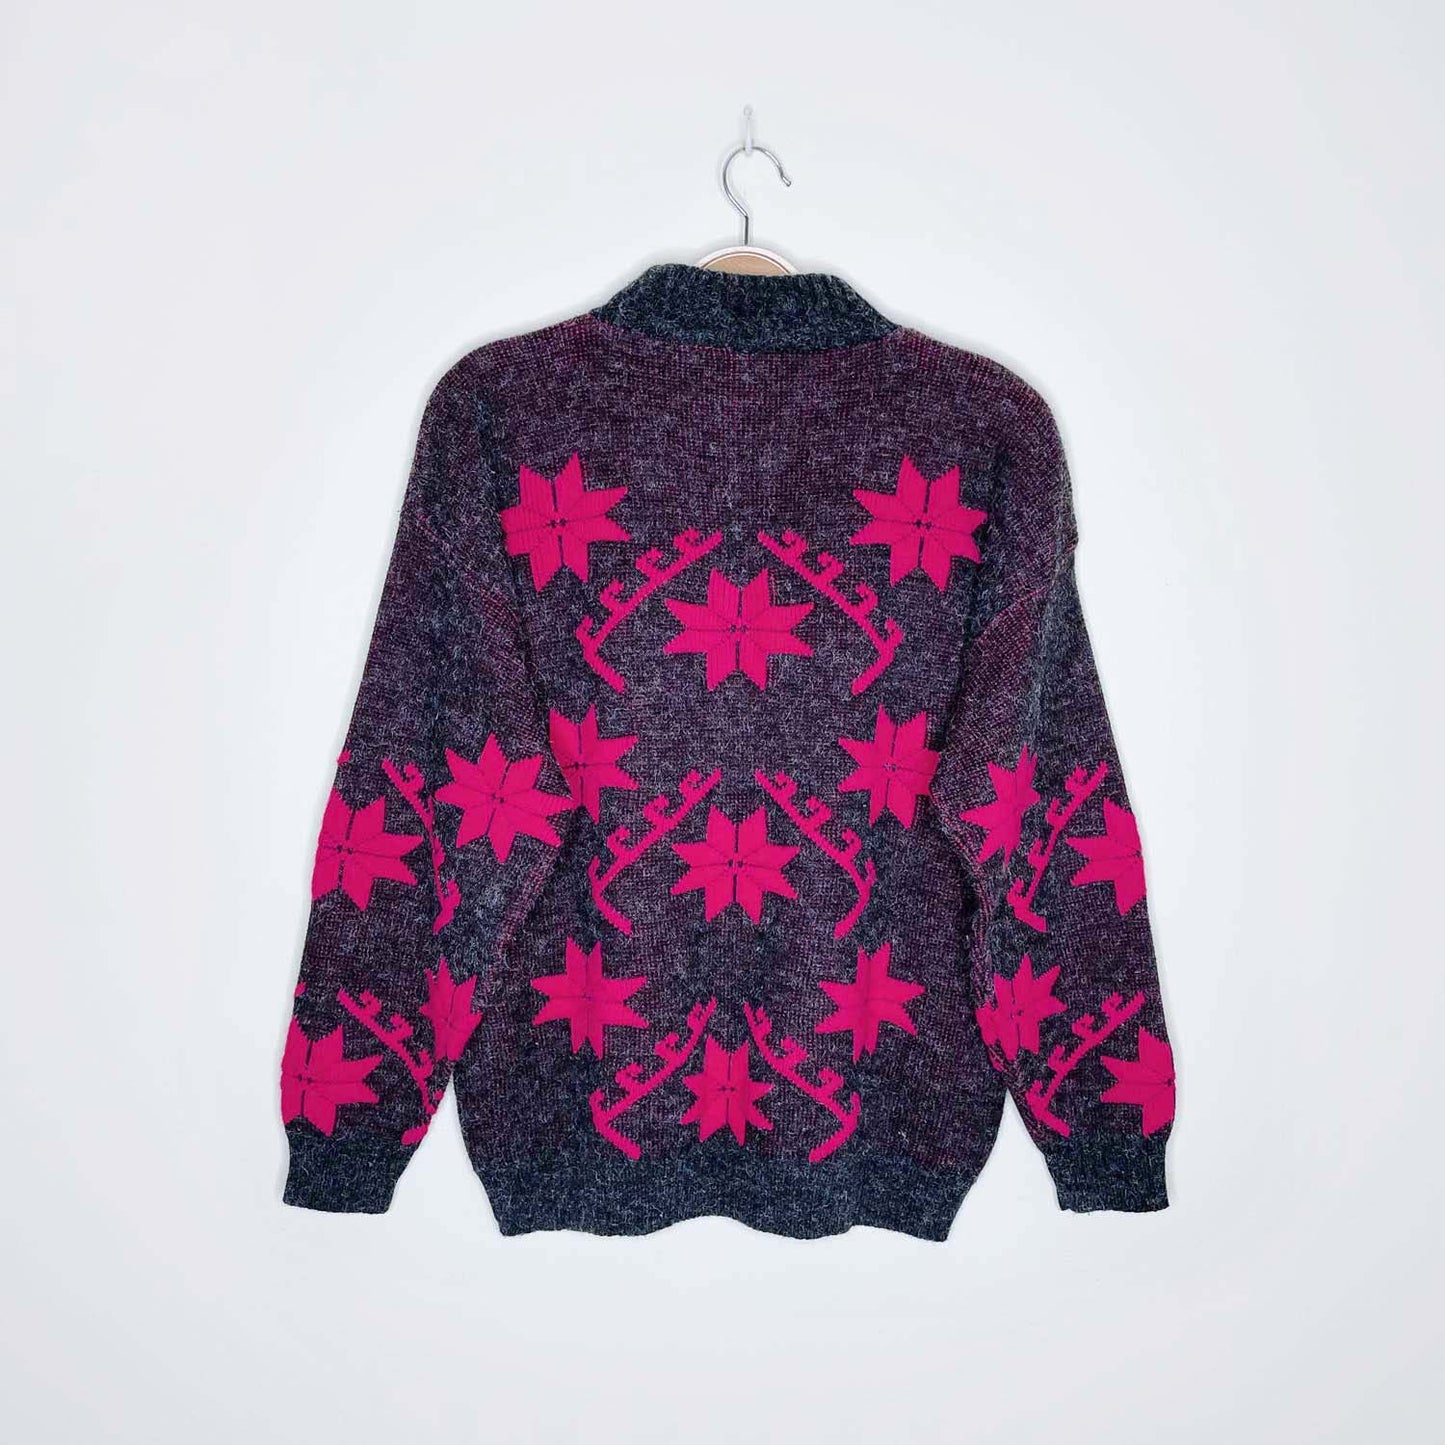 vintage kate collins hot pink snowflake mock neck sweater - size small